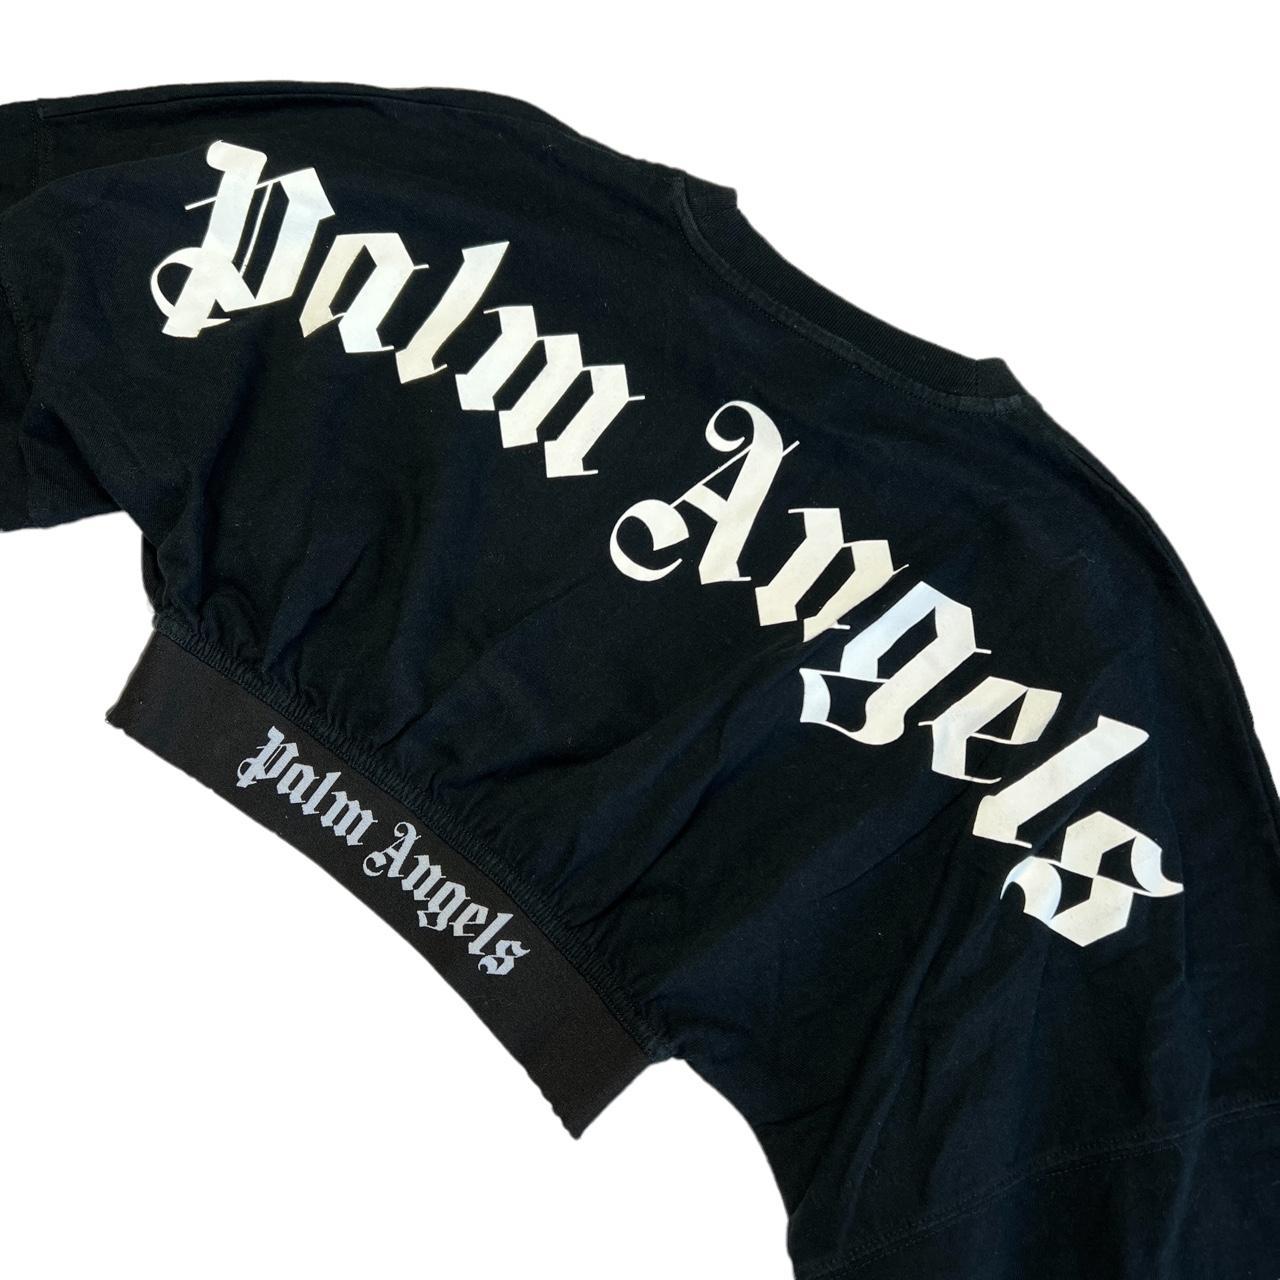 Product Image 4 - Authentic Palm Angels black and